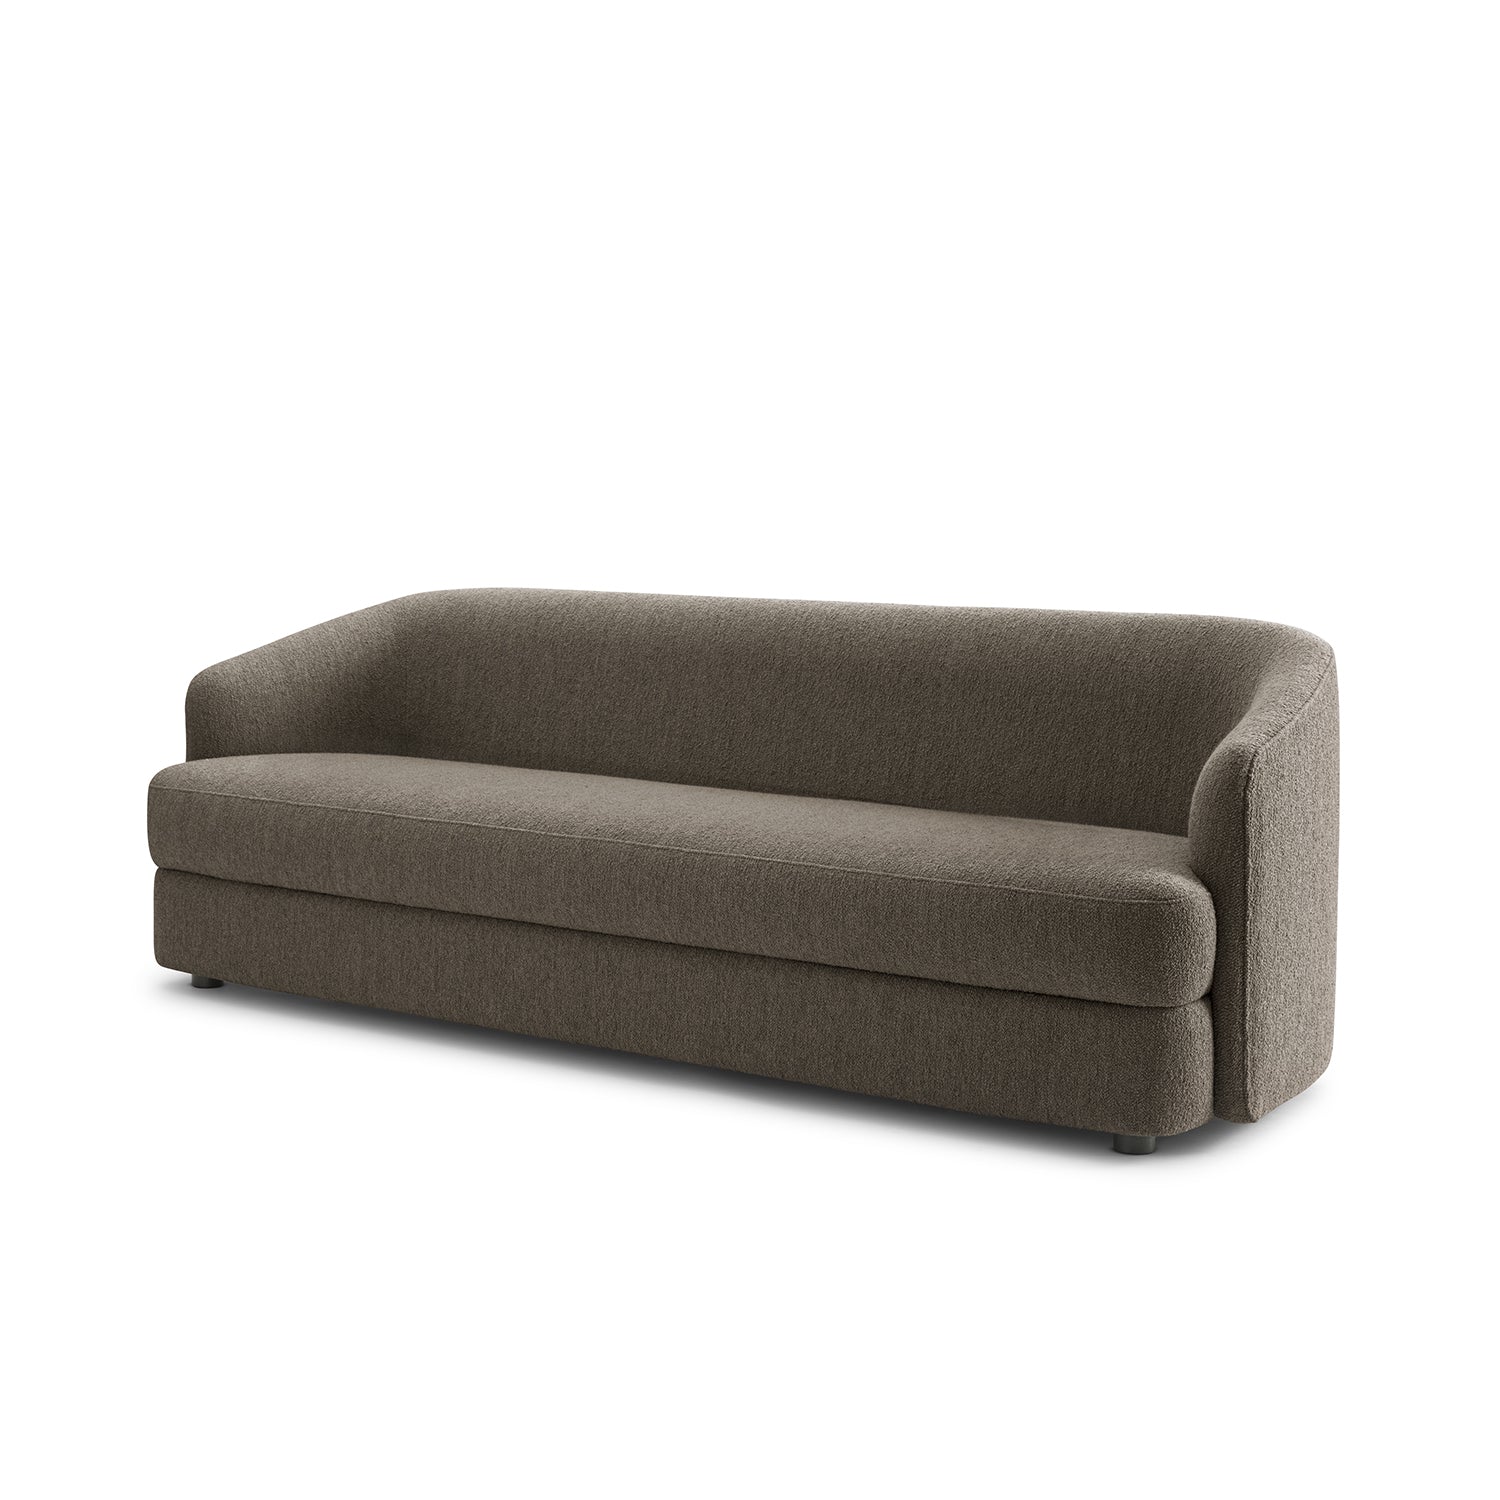 Covent 3 Seater Sofa - The Design Choice